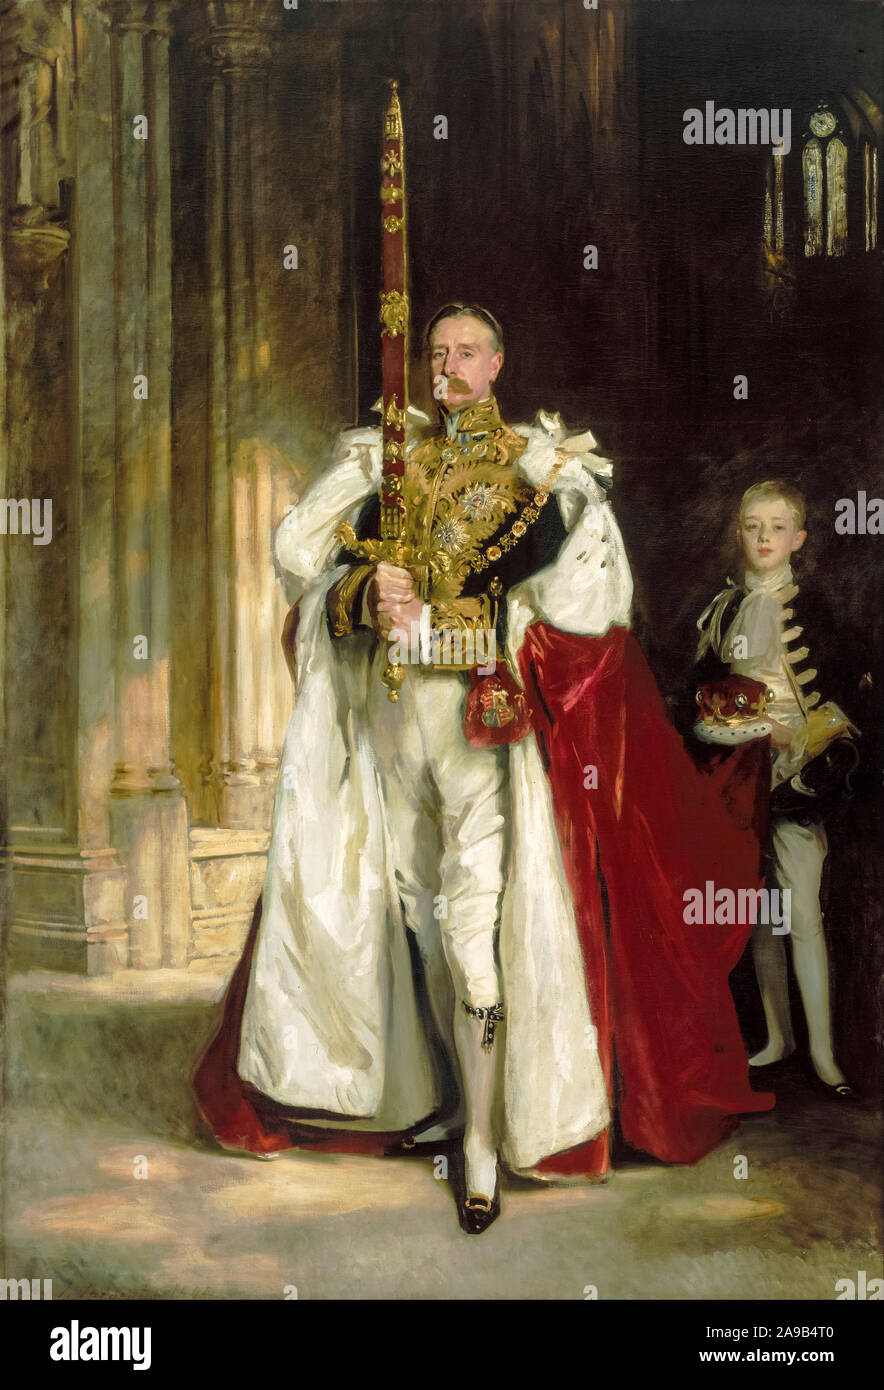 John Singer Sargent, portrait painting, Charles Stewart, Sixth Marquess of Londonderry, 1904 Stock Photo